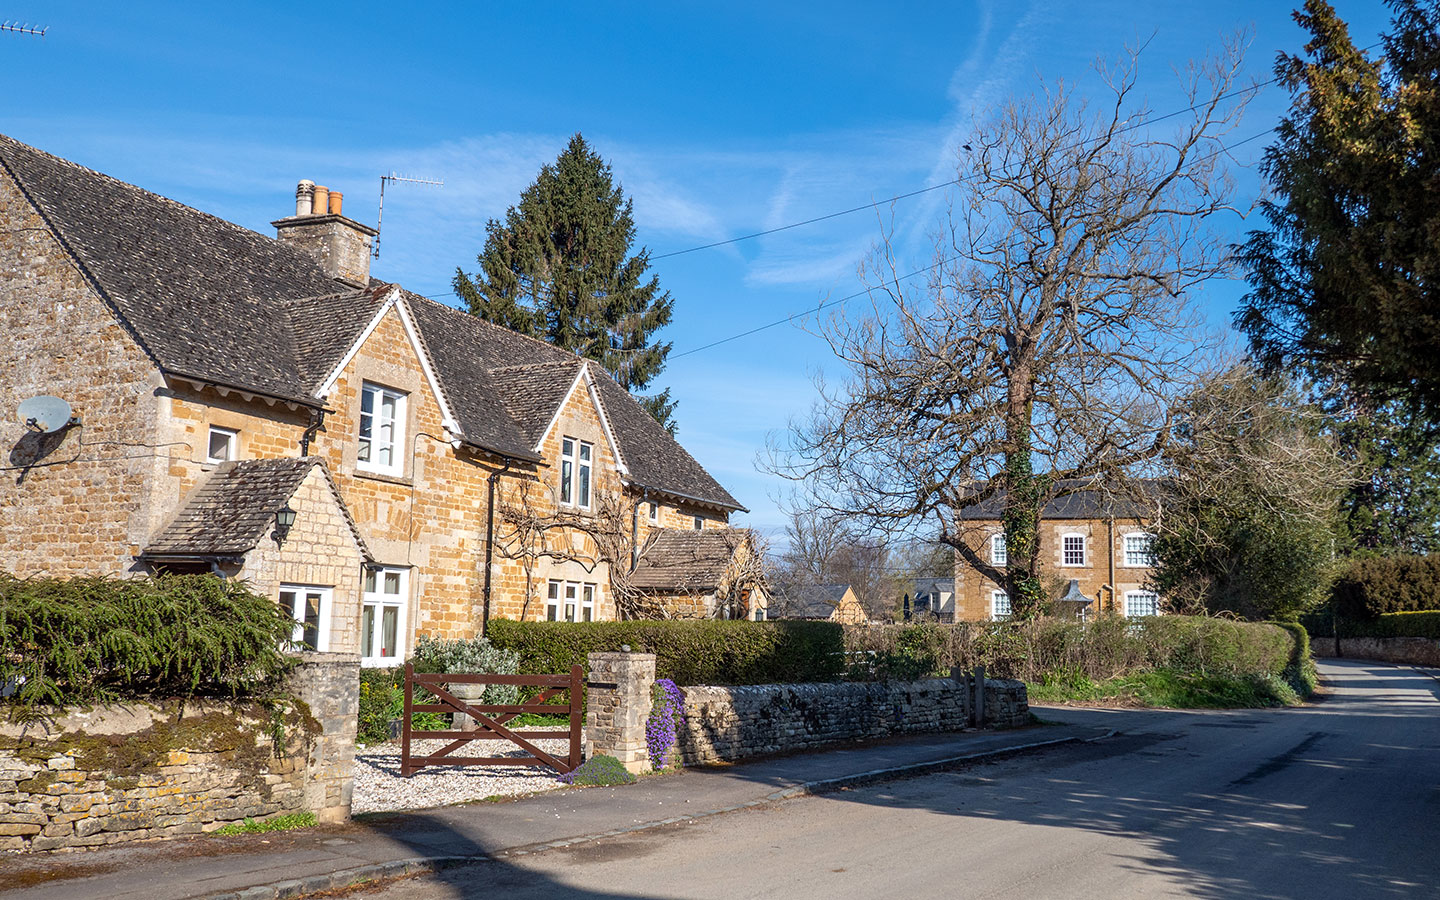 Stone cottages in Wyck Rissington